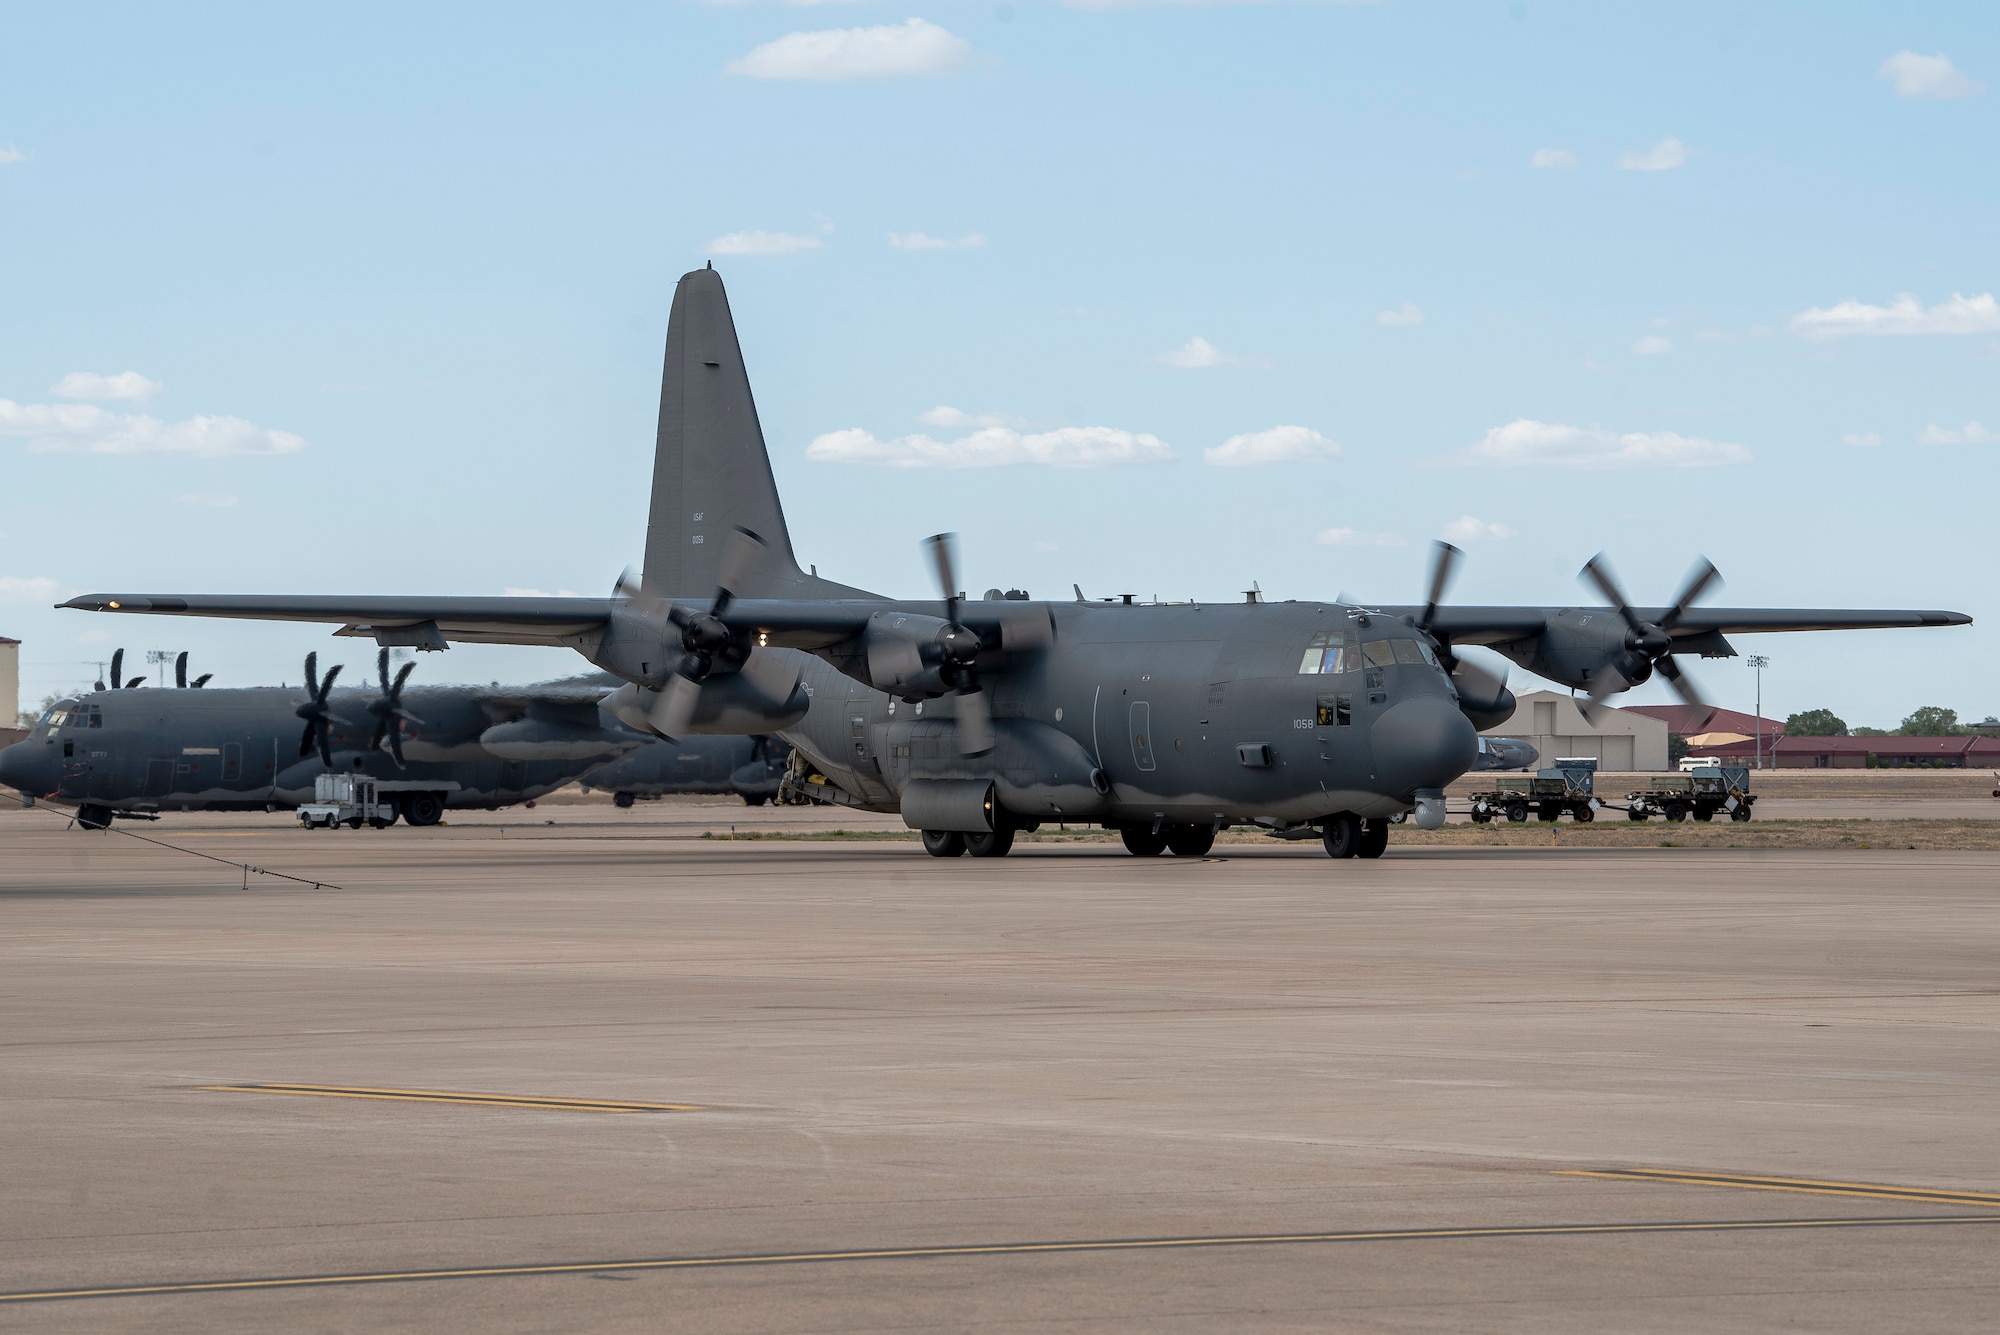 An AC-130W aircraft, piloted by members of the 551st Special Operations Squadron, pulls in after their fini flight at Cannon Air Force Base, N.M., April 29, 2021. The squadron will be officially made inactive June 15, 2021, but the flight marked the end of training at the 551 SOS. (U.S. Air Force photo by Senior Airman Vernon R. Walter III)